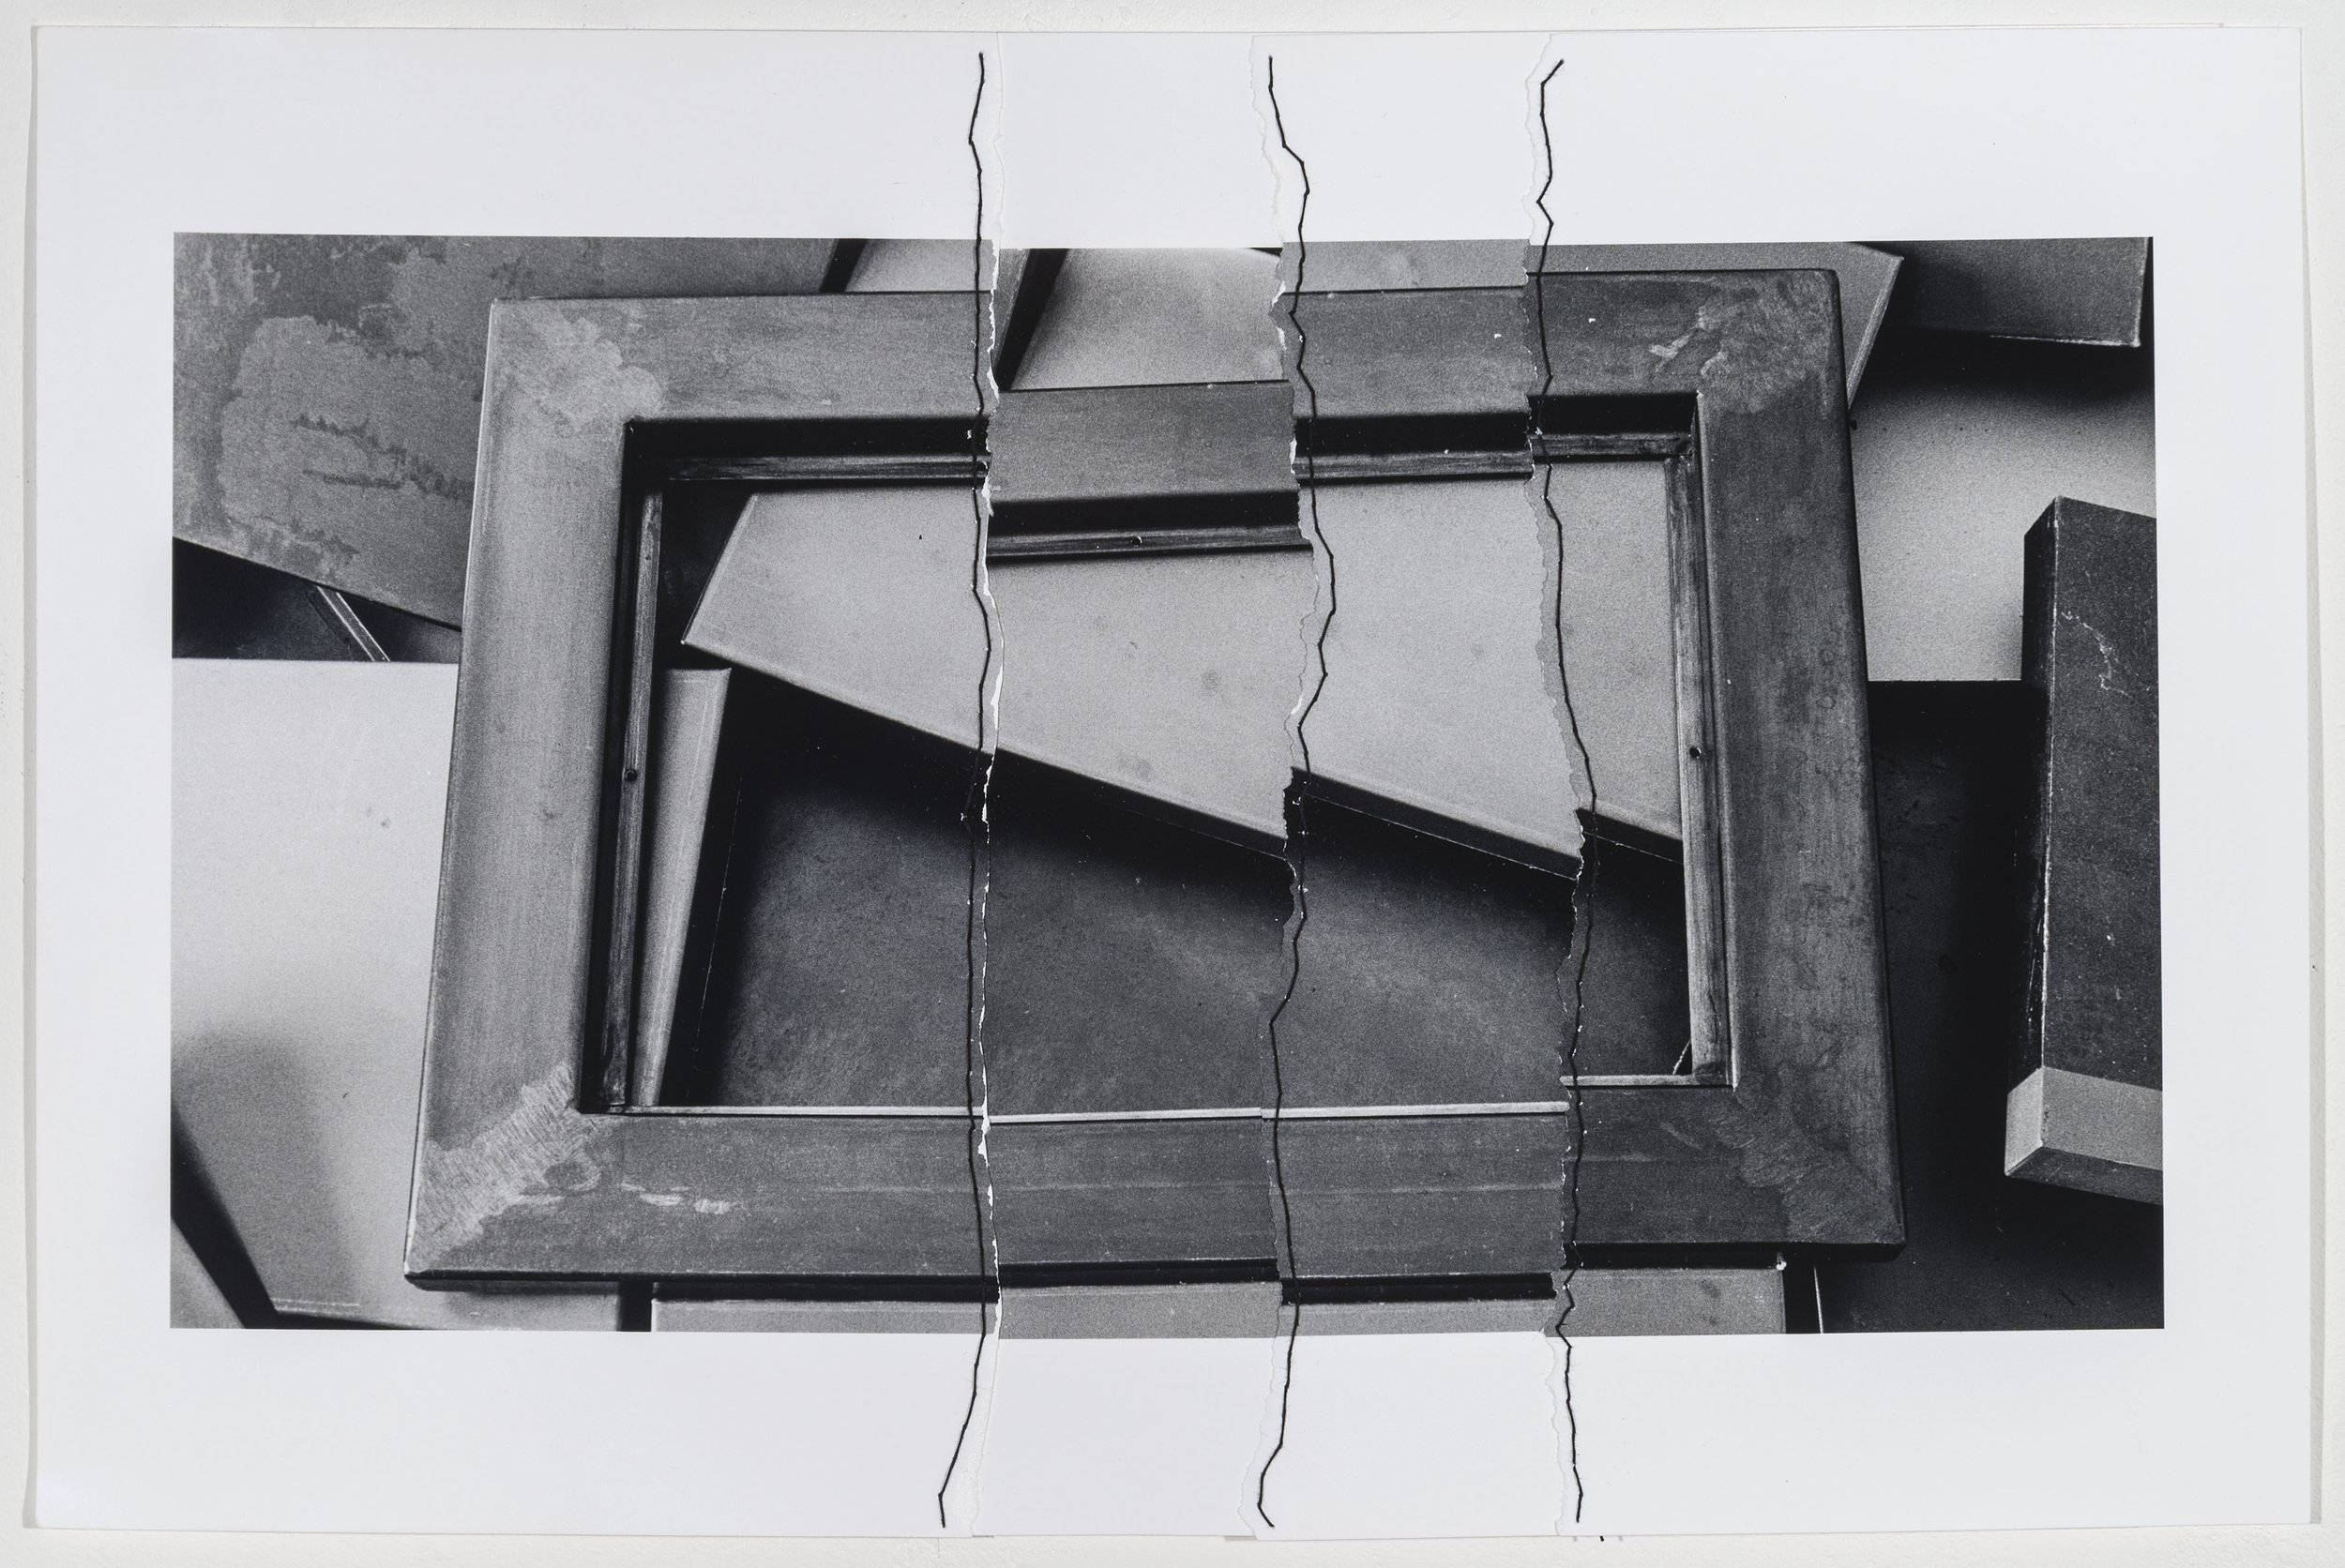  #30   2014-2018   Collaged selenium toned silver gelatin prints with thread   11” x 16-1/2”  